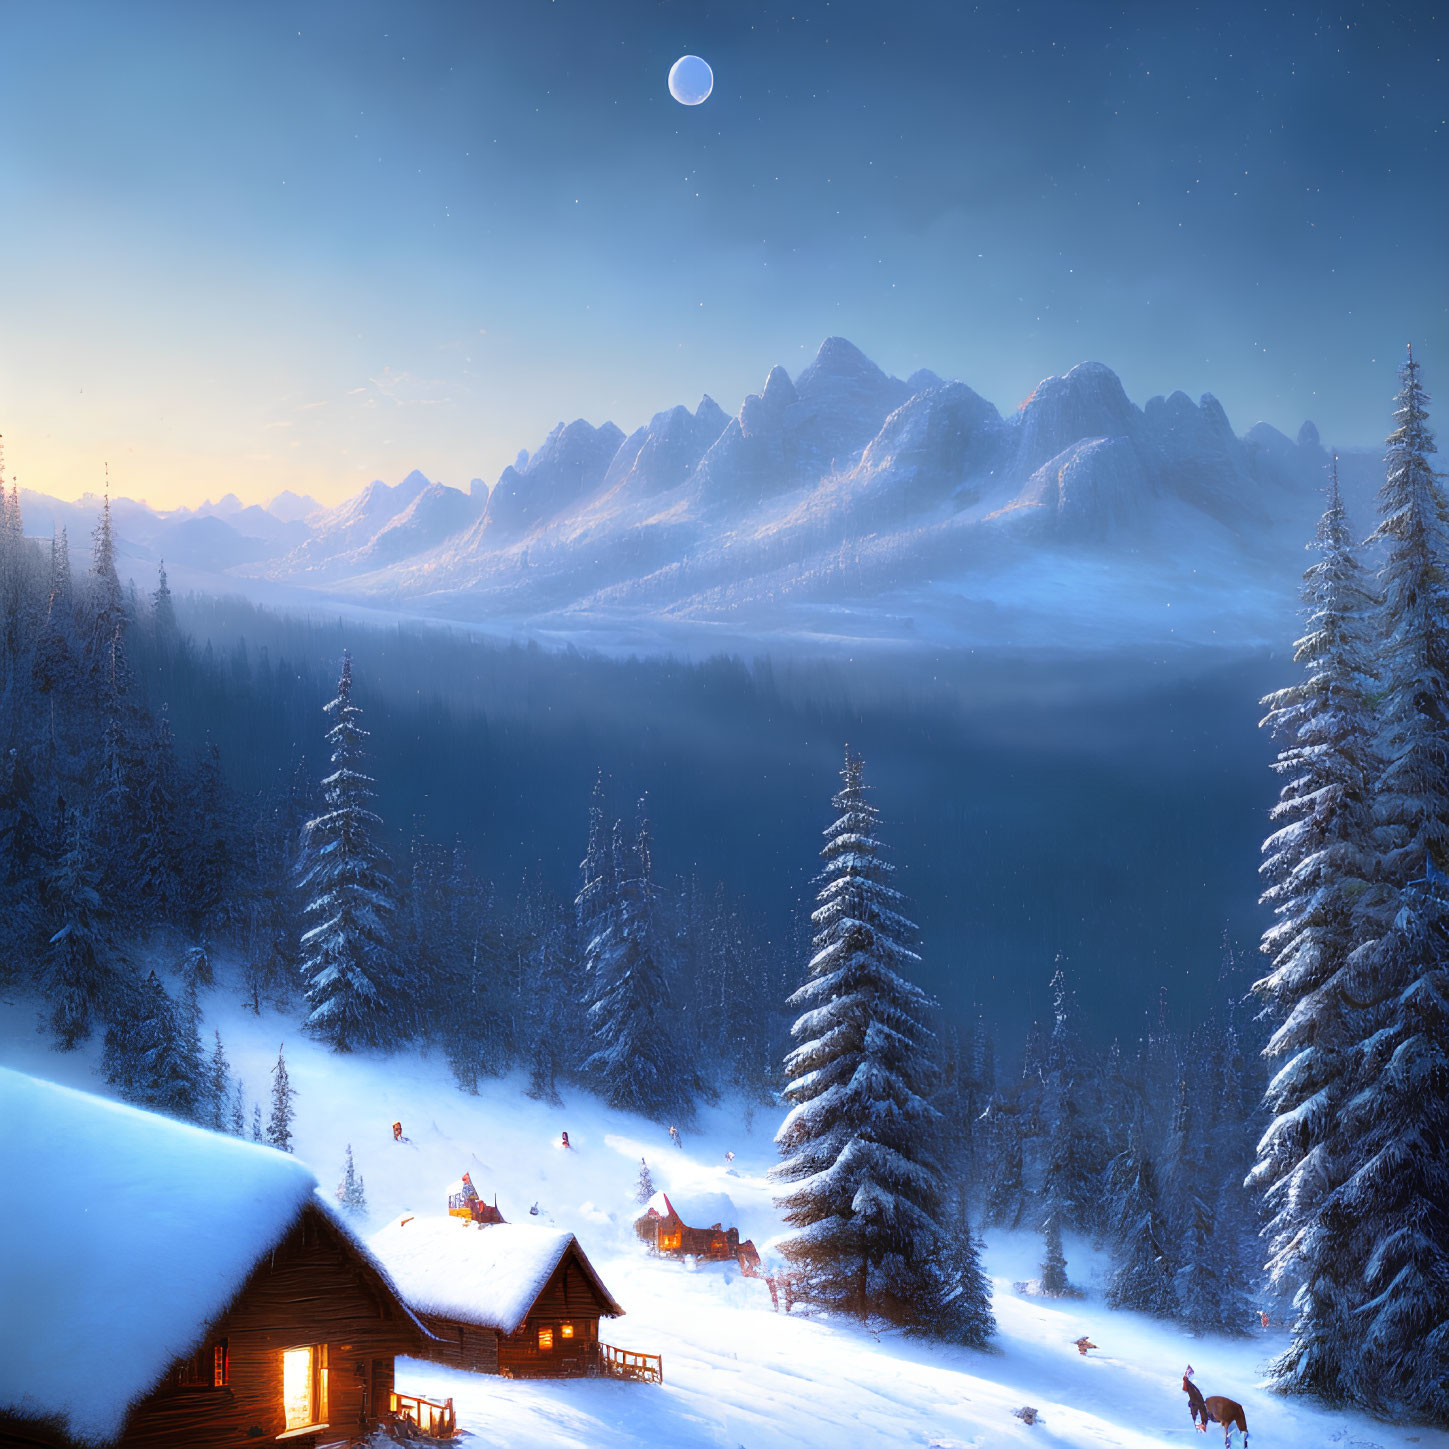 Snow-covered trees and cabins under starlit sky on serene winter night